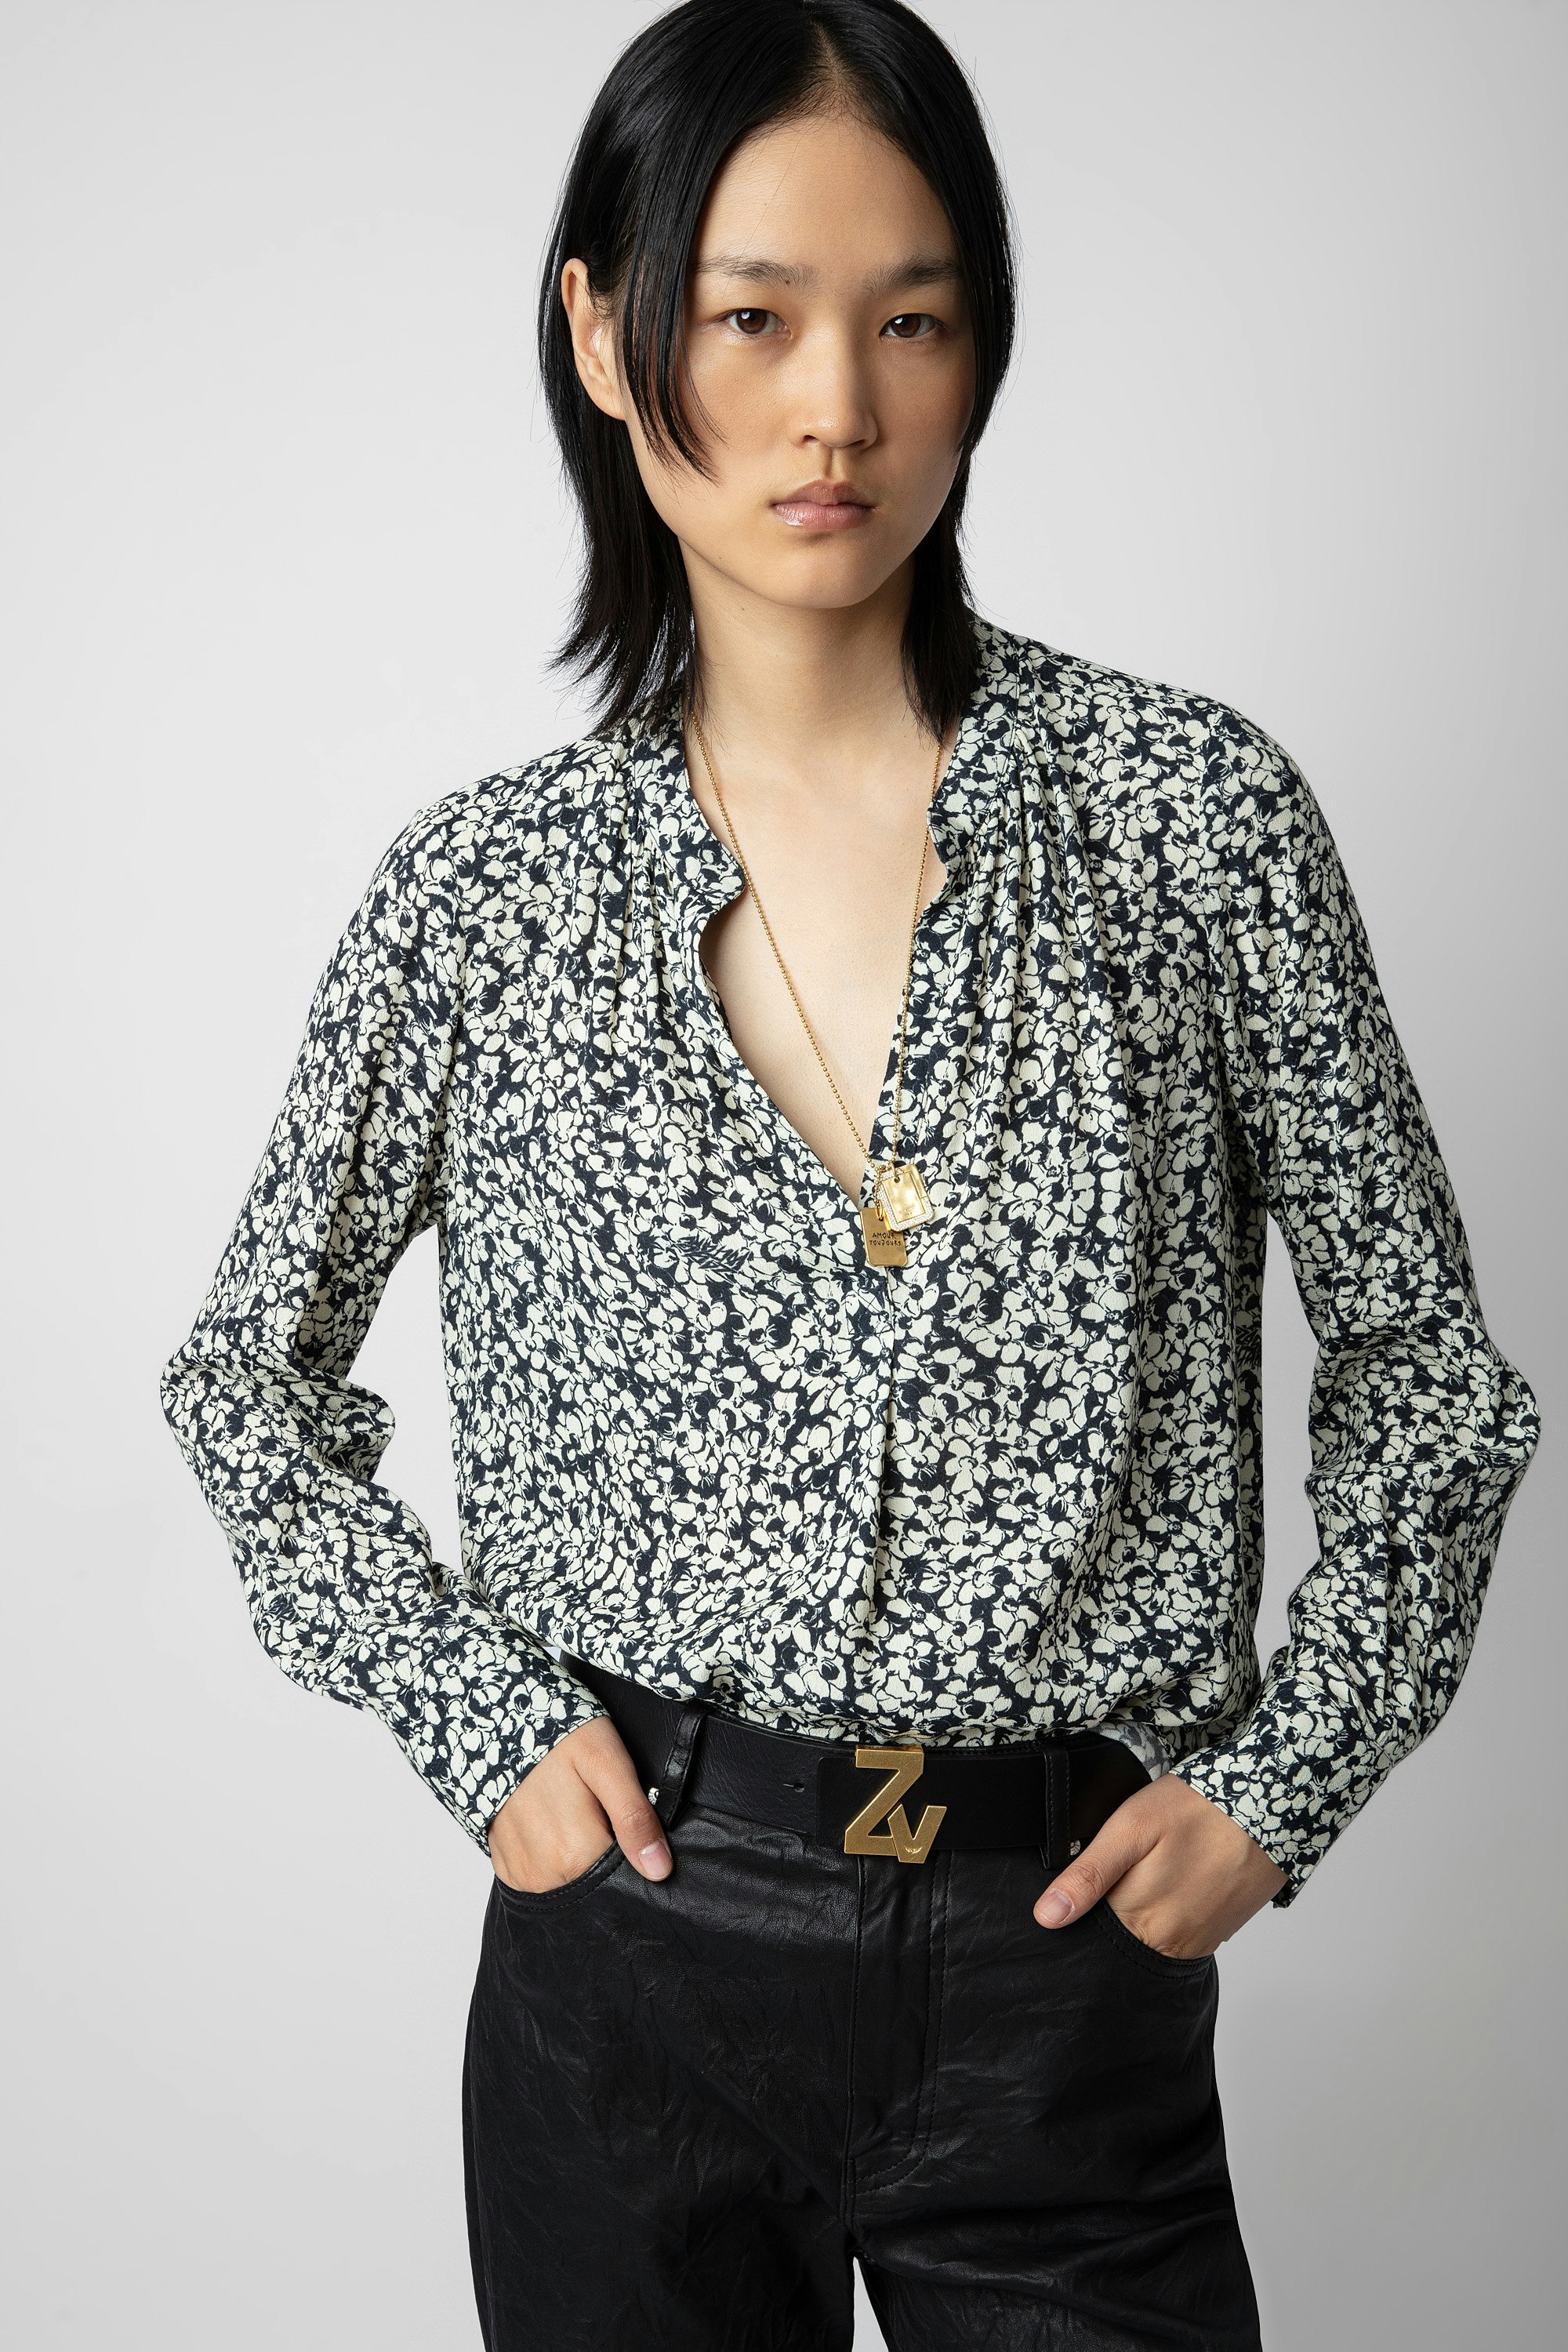 Tink Blouse - Women’s ecru floral-print blouse with open collar.